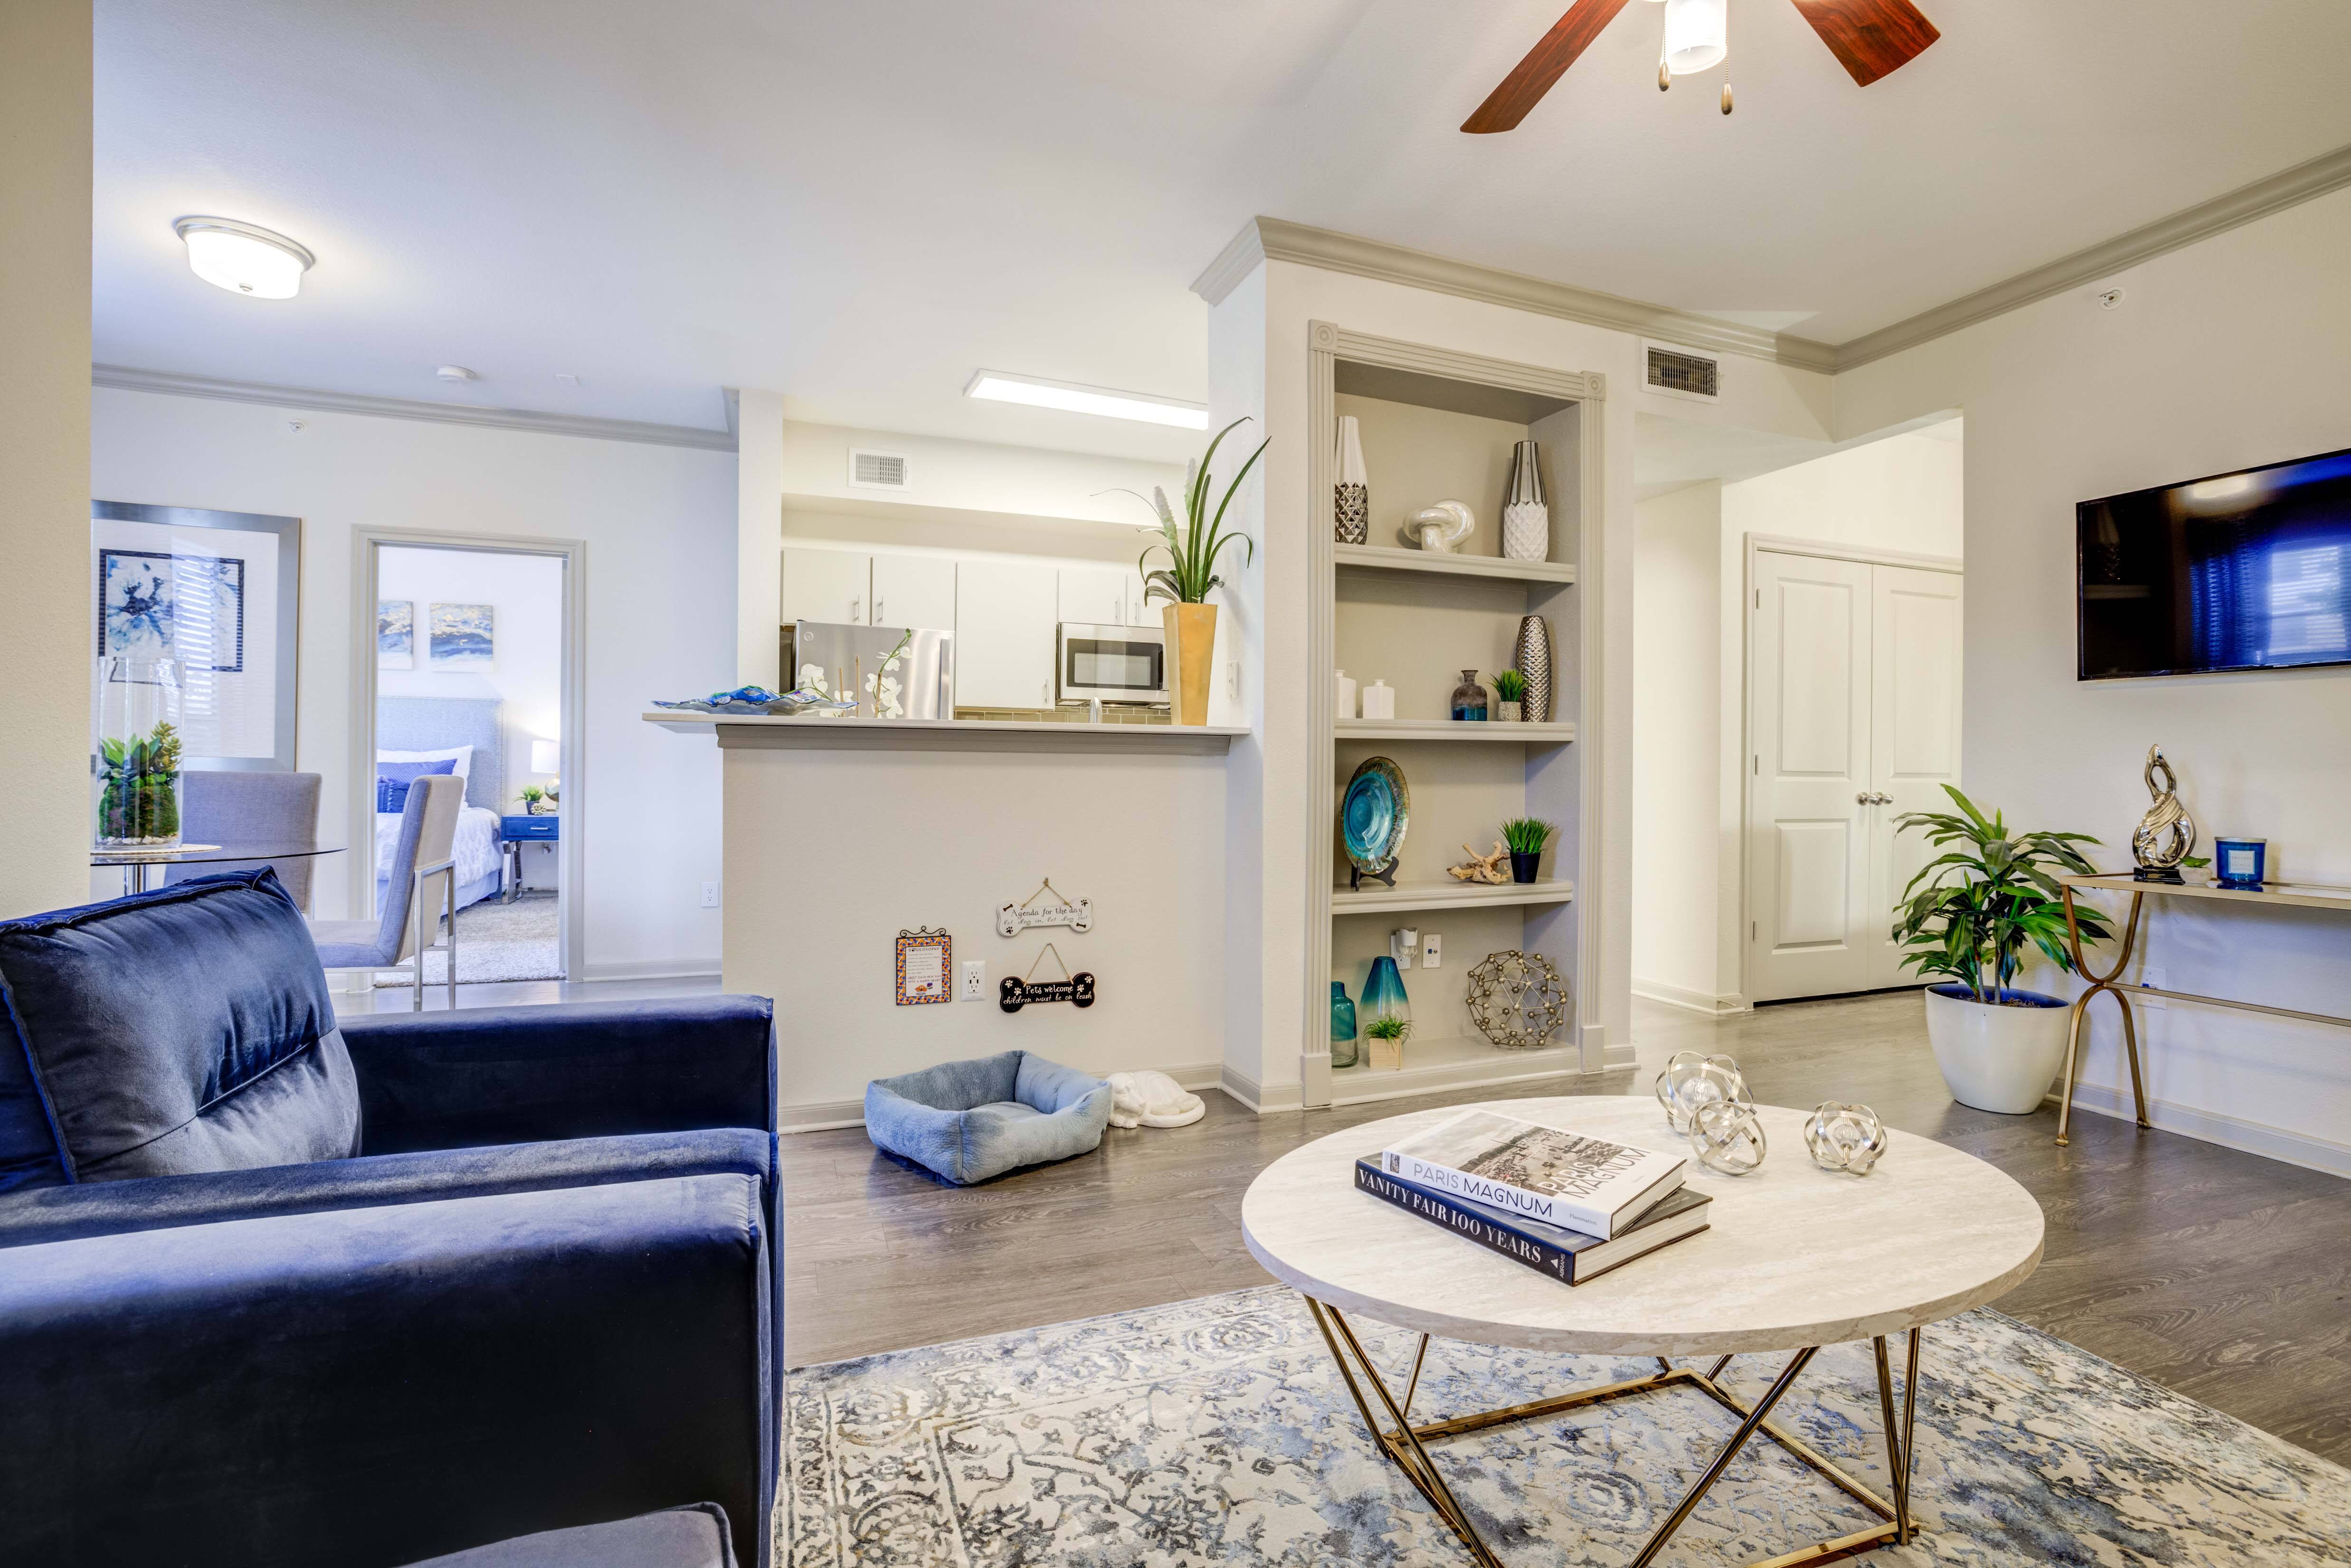 Spacious Living & Dining areas at Hilltop at Shavano